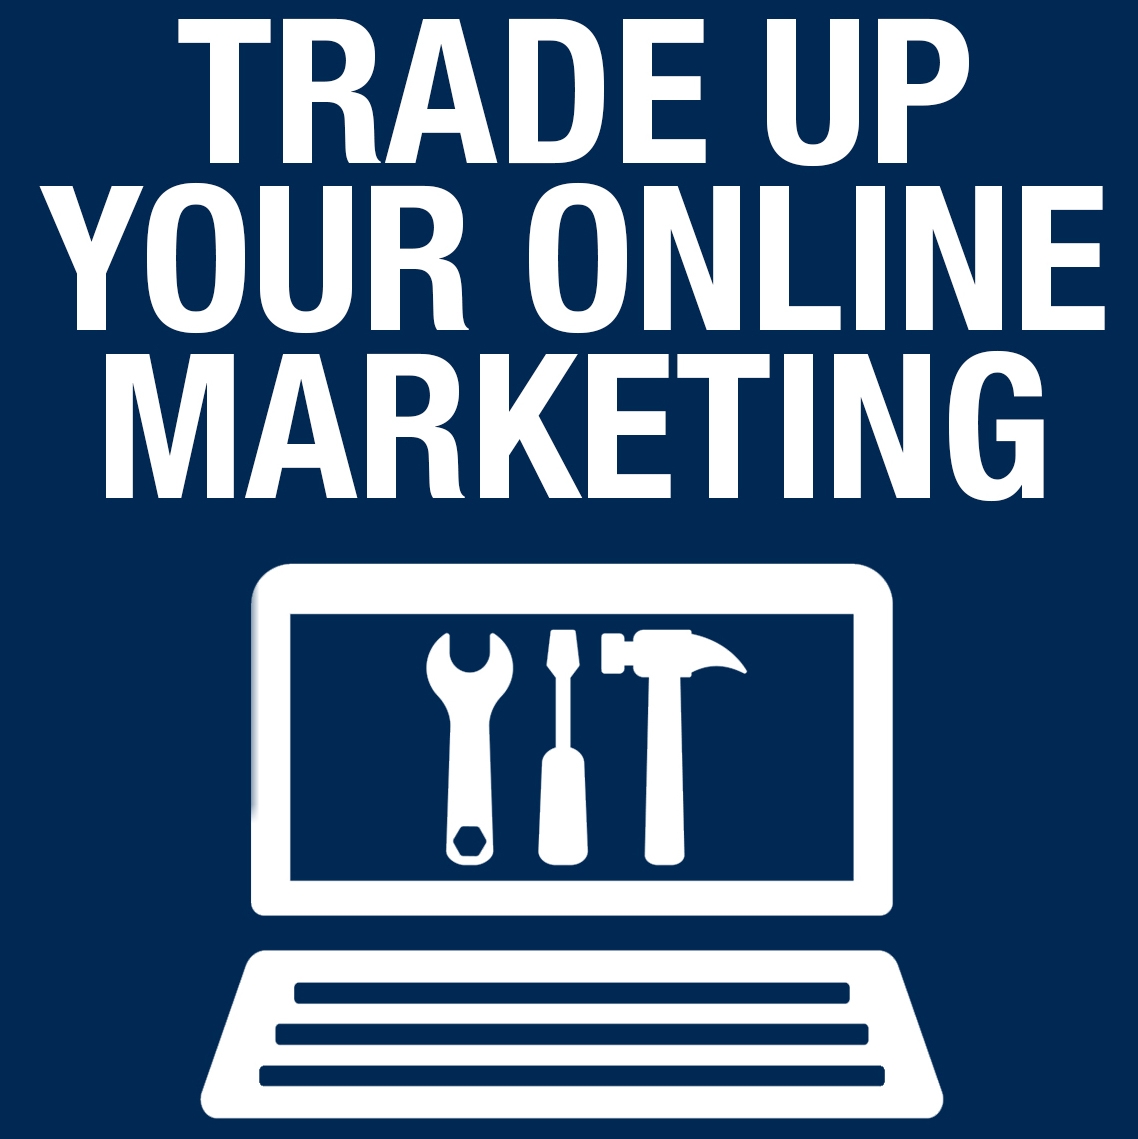 Trade Up Your Online Marketing: New Book Exclusively Written To Help The Building And Construction Industry Win More Business Online